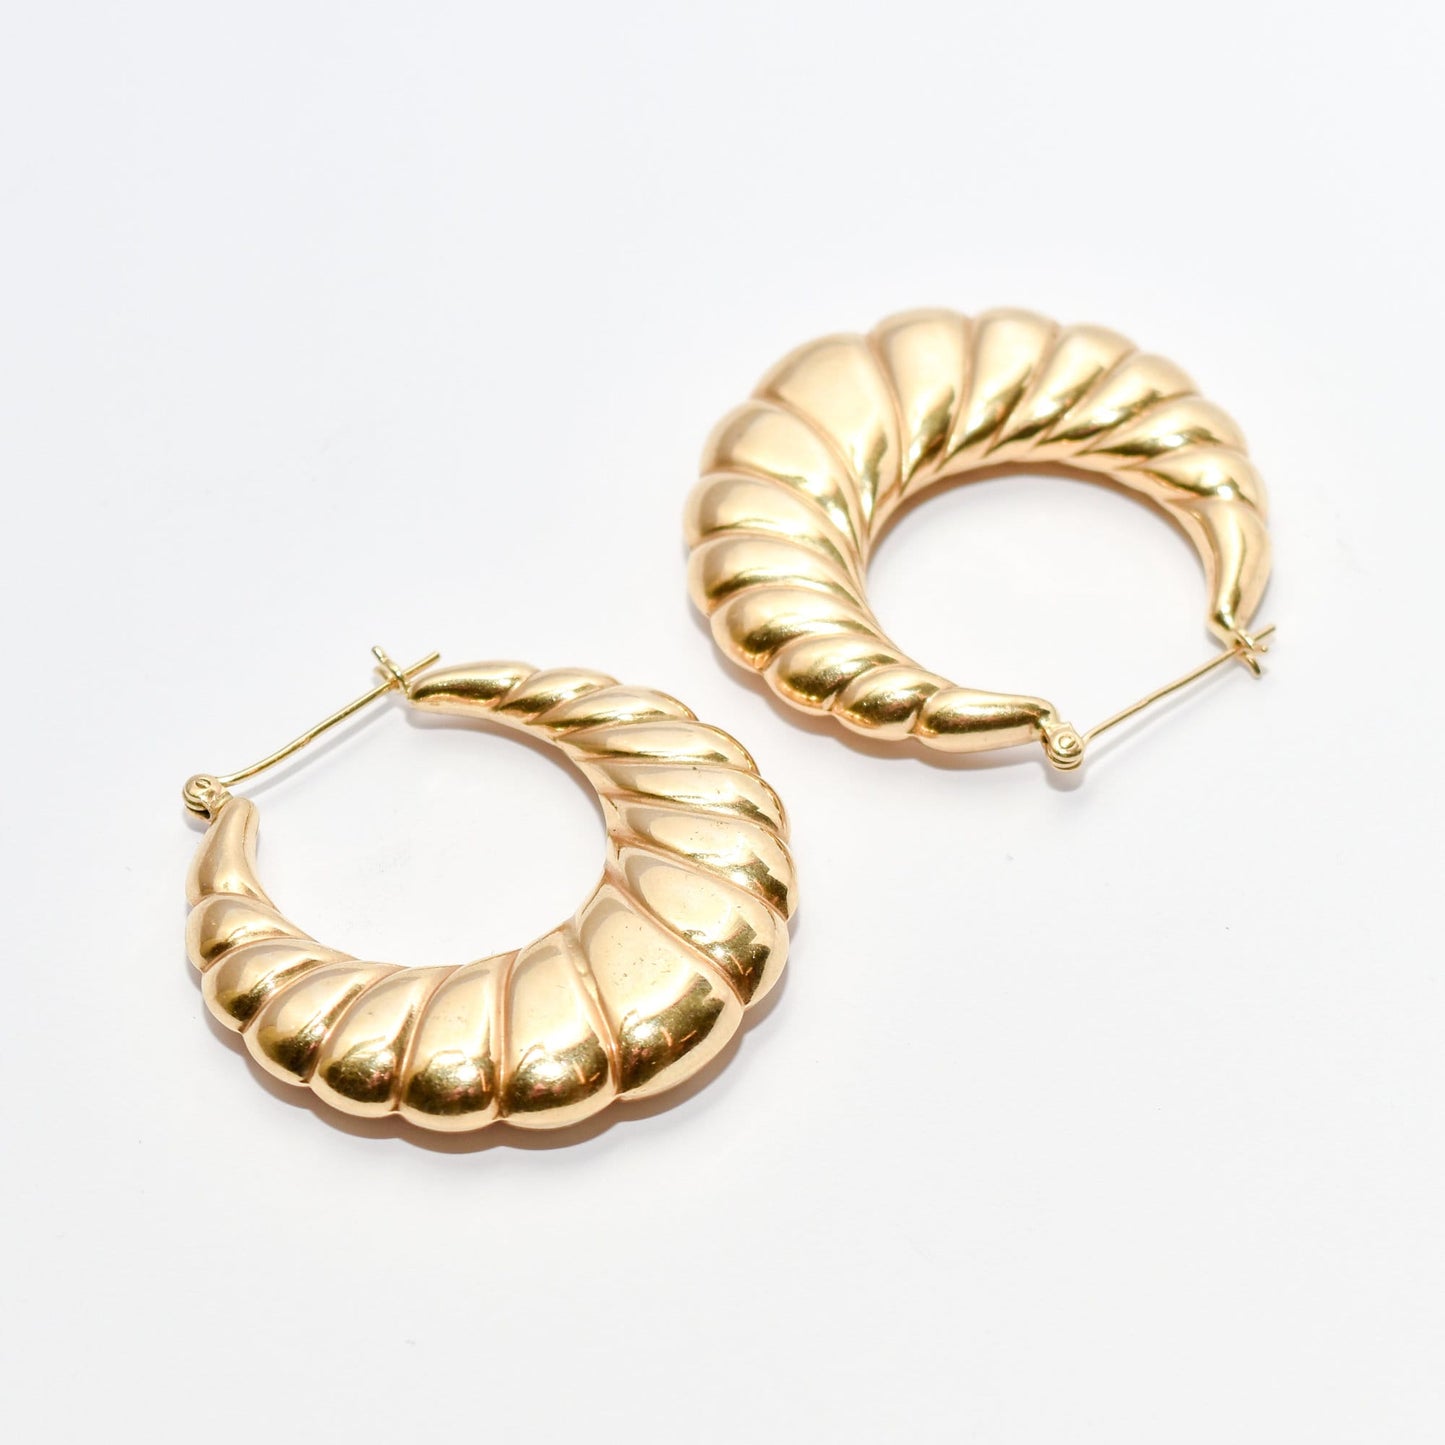 MCM 14K gold puffed scallop hoop earrings, medium-sized yellow gold estate jewelry, 36mm wide, on white background.